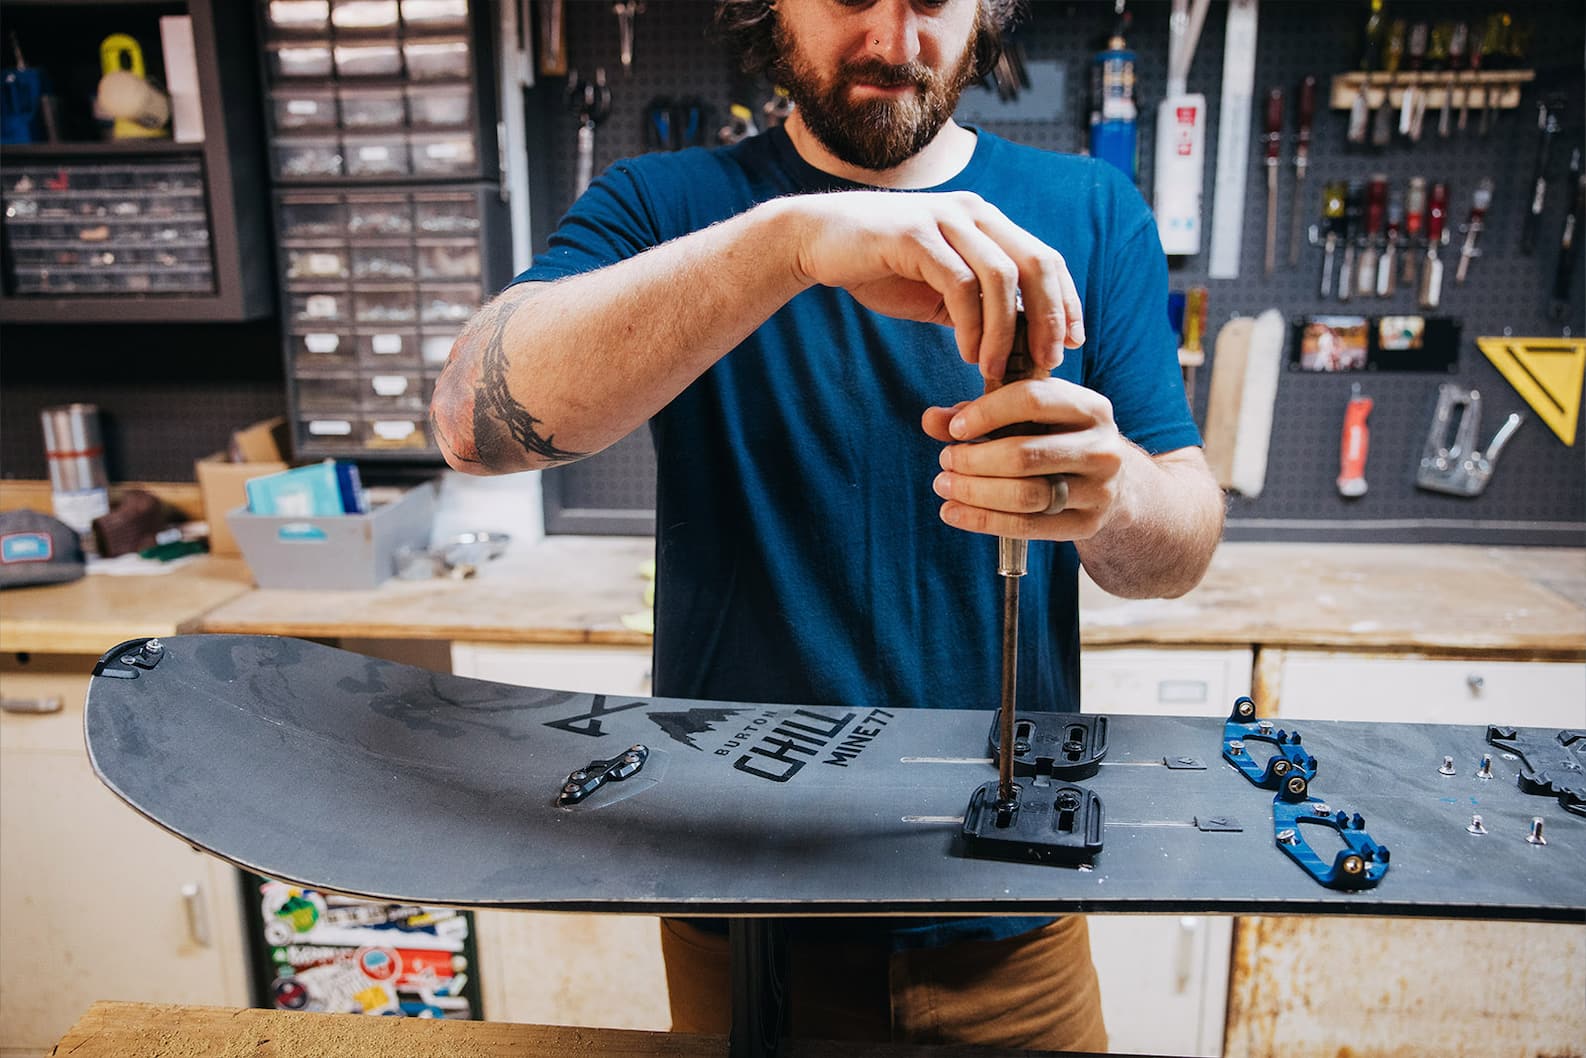 A Guide to Burton Binding Adjustments and Easy At-Home Repairs